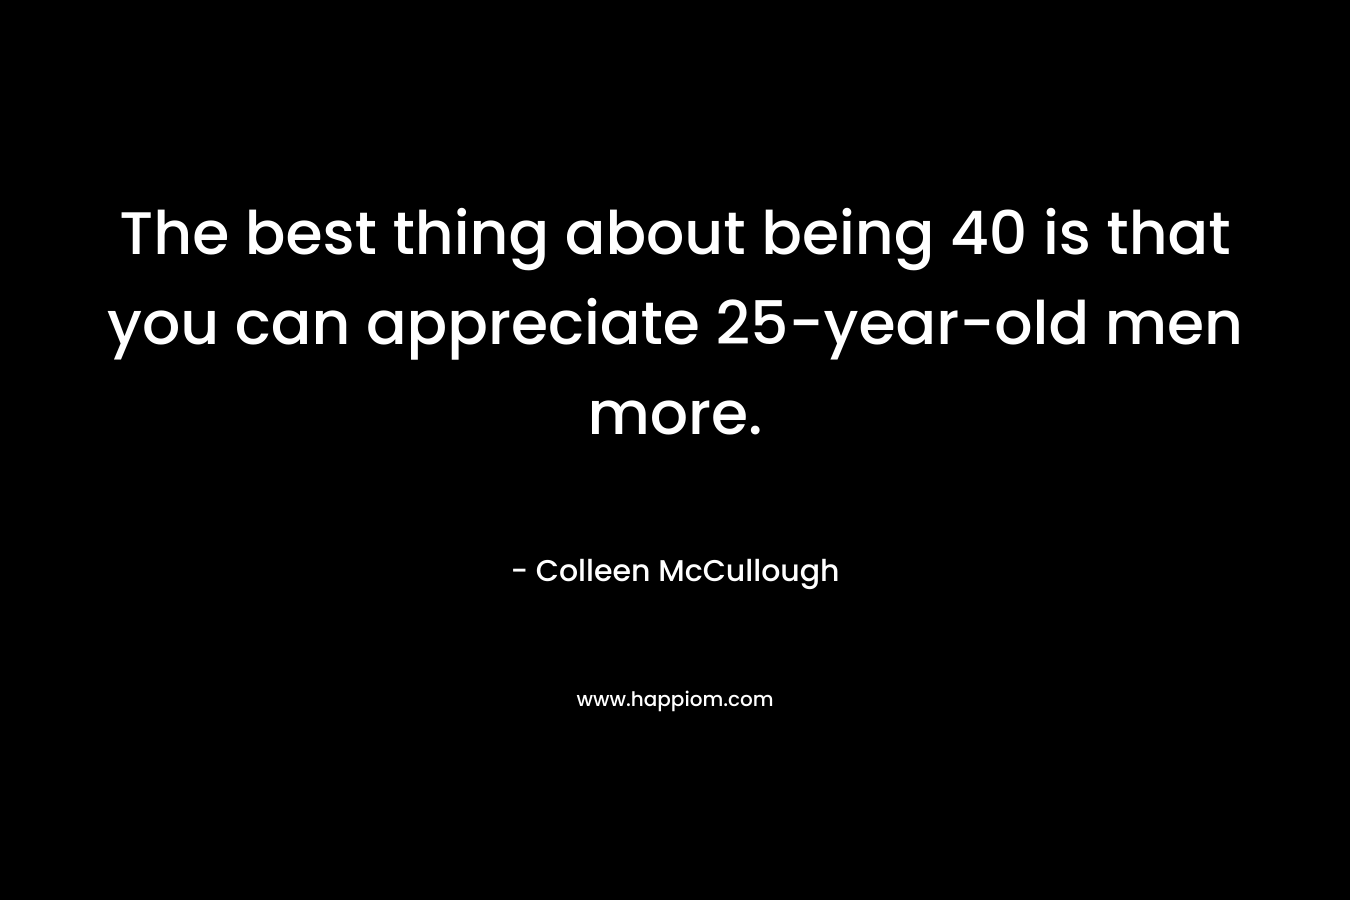 The best thing about being 40 is that you can appreciate 25-year-old men more. – Colleen McCullough